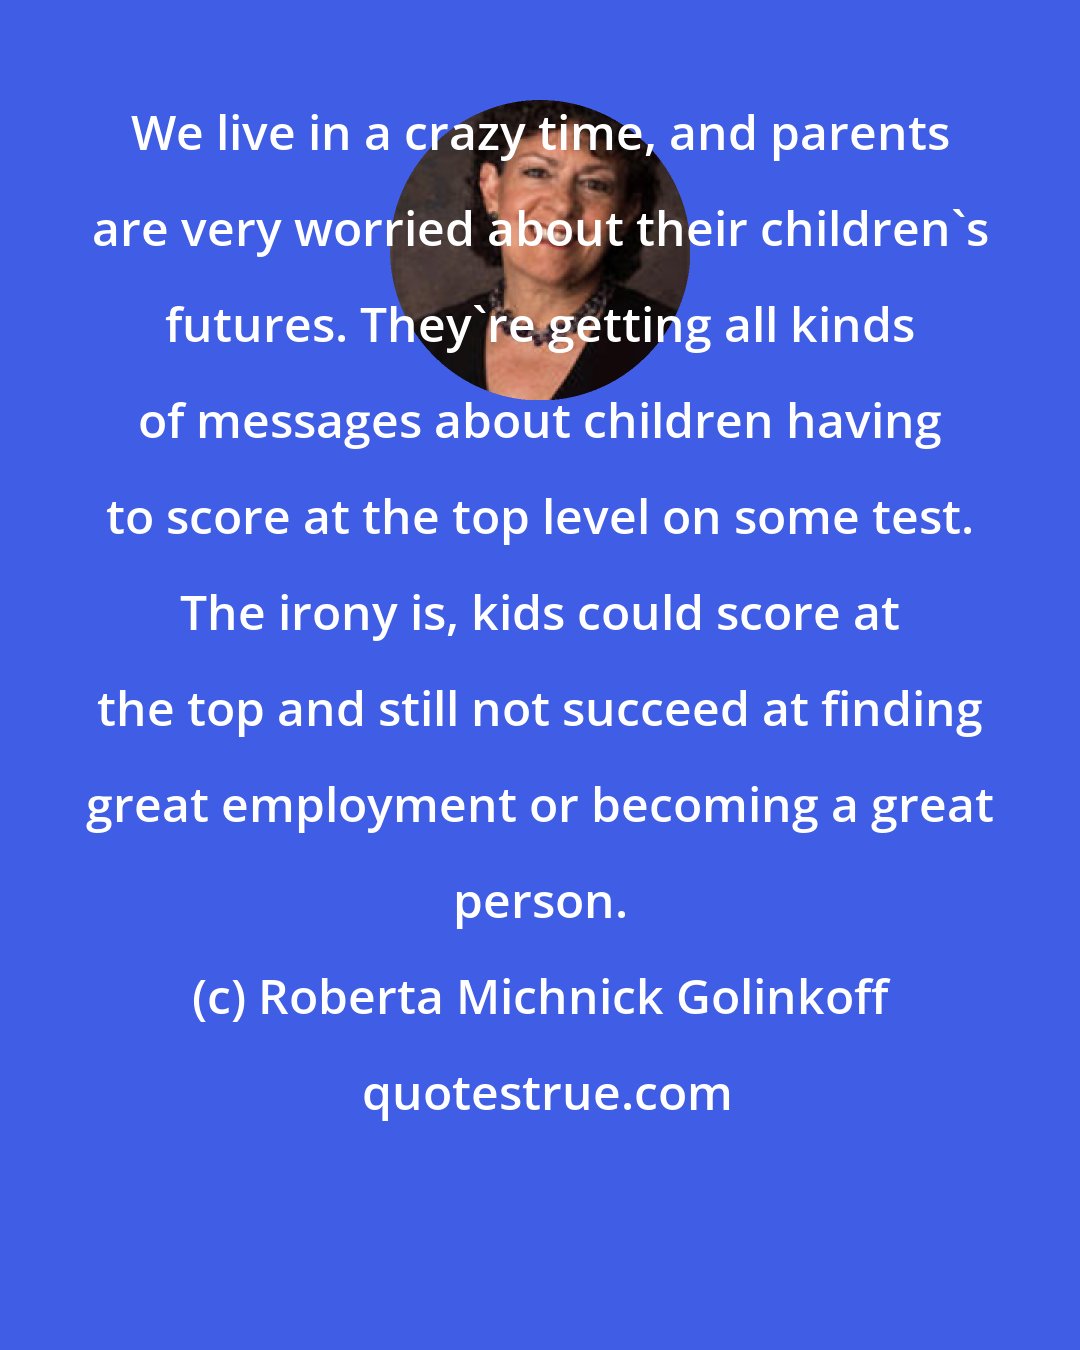 Roberta Michnick Golinkoff: We live in a crazy time, and parents are very worried about their children's futures. They're getting all kinds of messages about children having to score at the top level on some test. The irony is, kids could score at the top and still not succeed at finding great employment or becoming a great person.